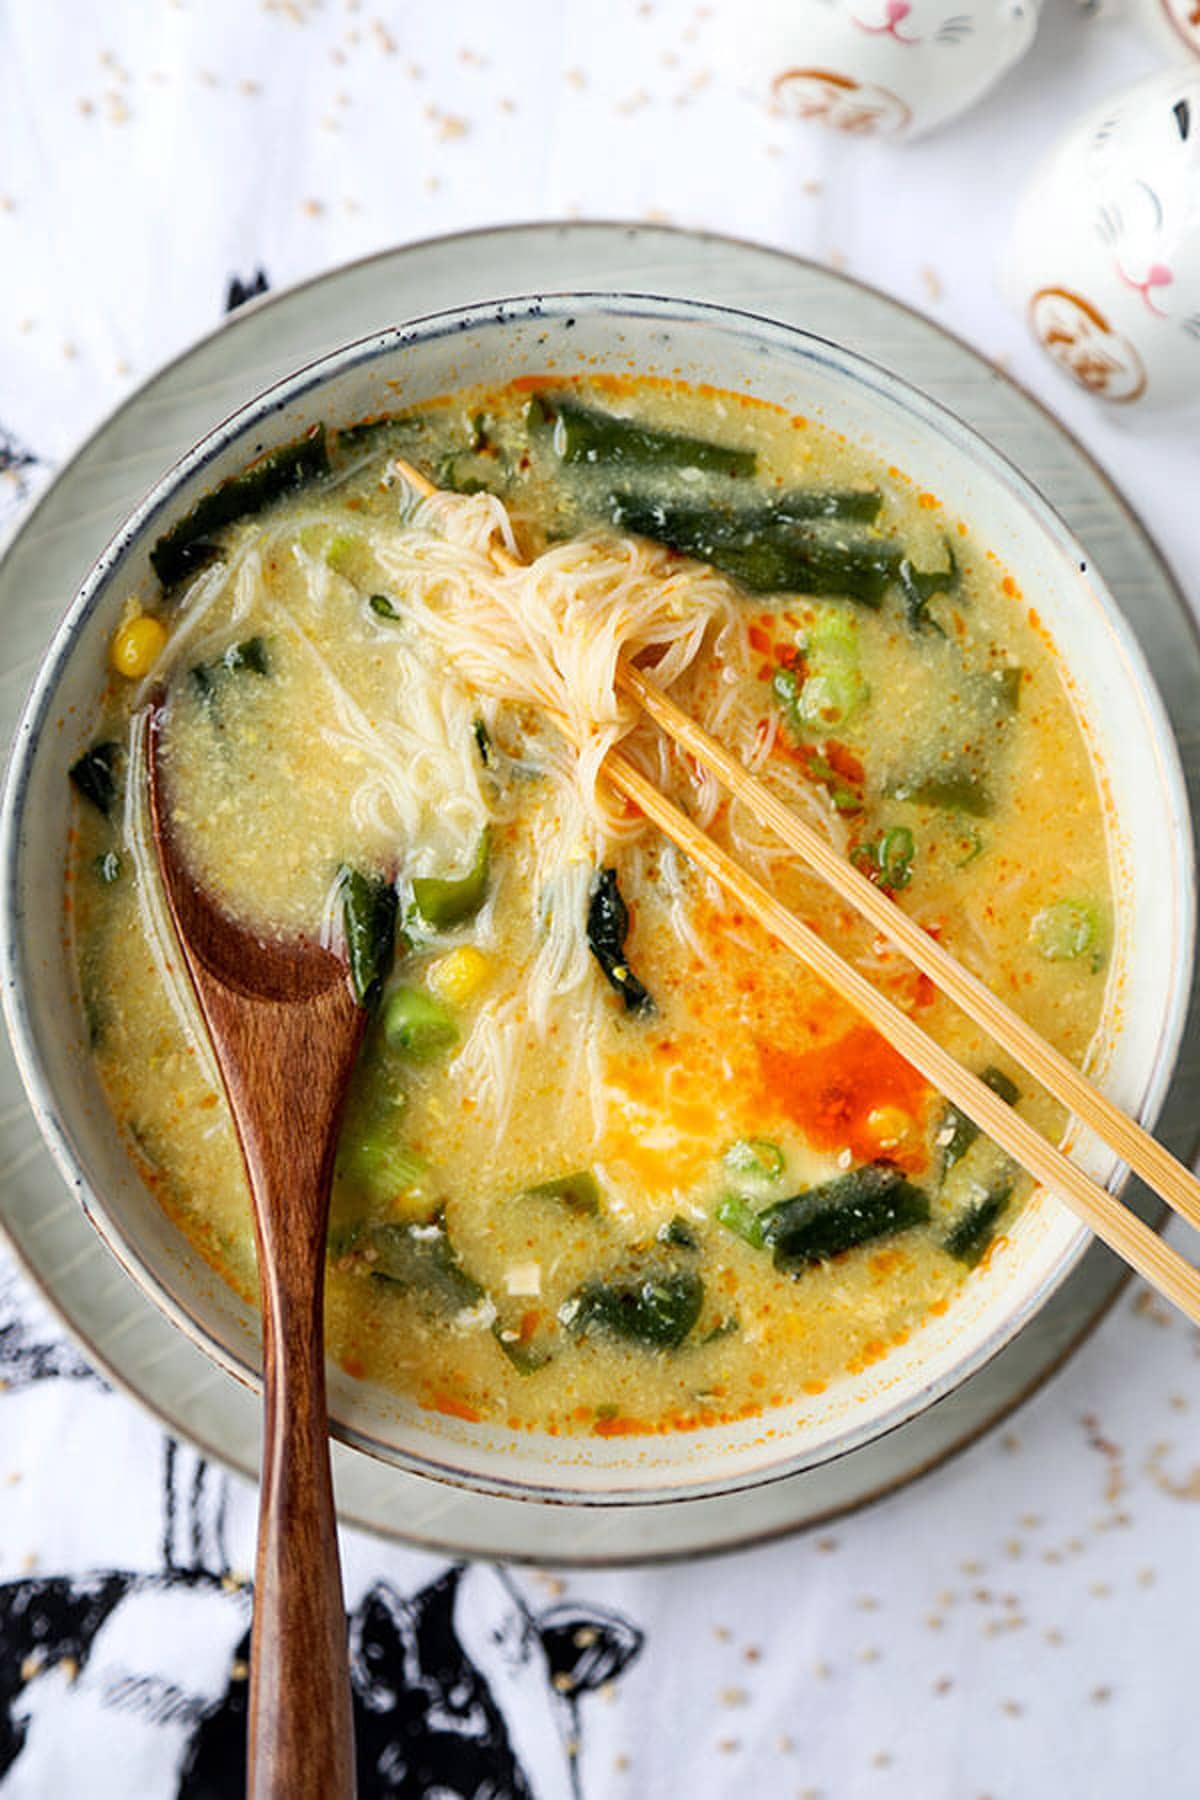 wakame and vermicelli soup